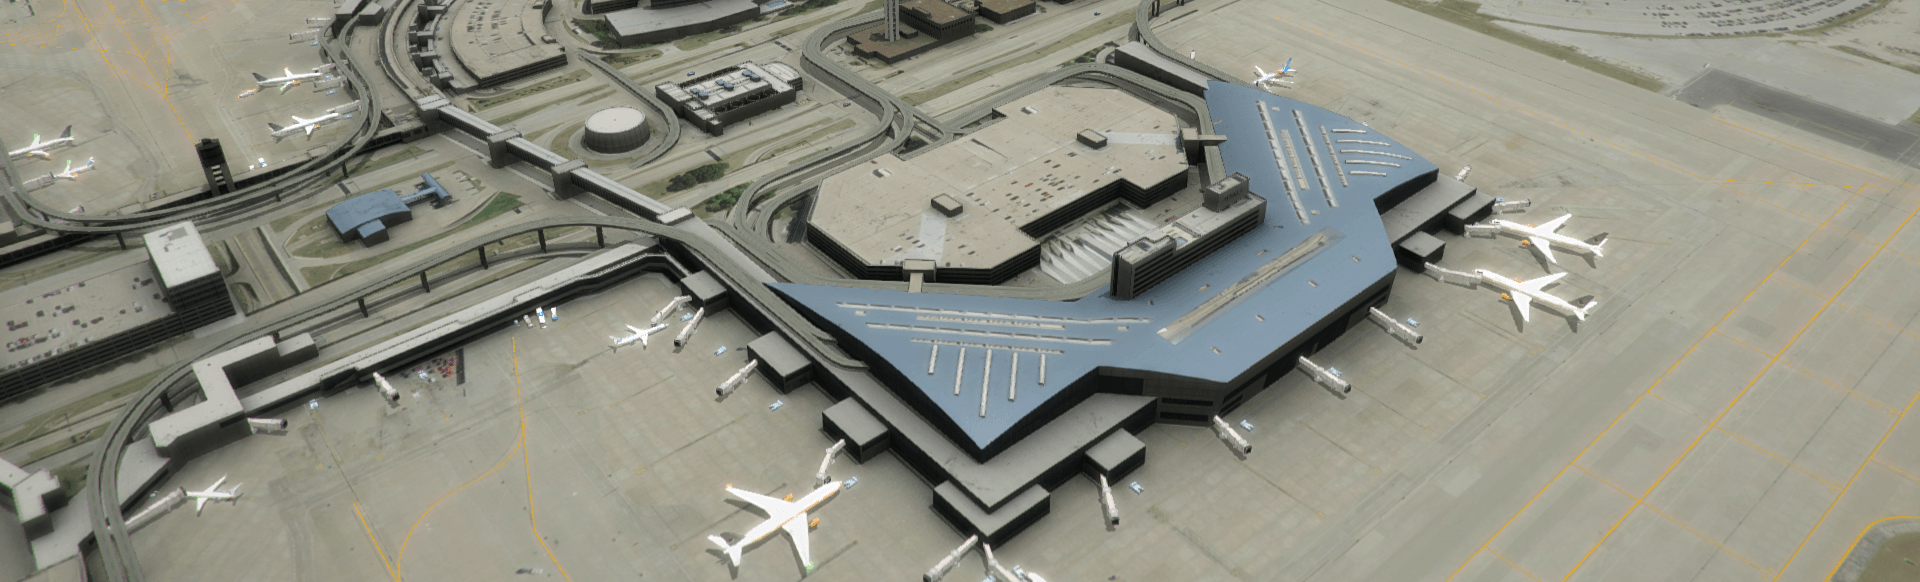 Dallas airport tower3d